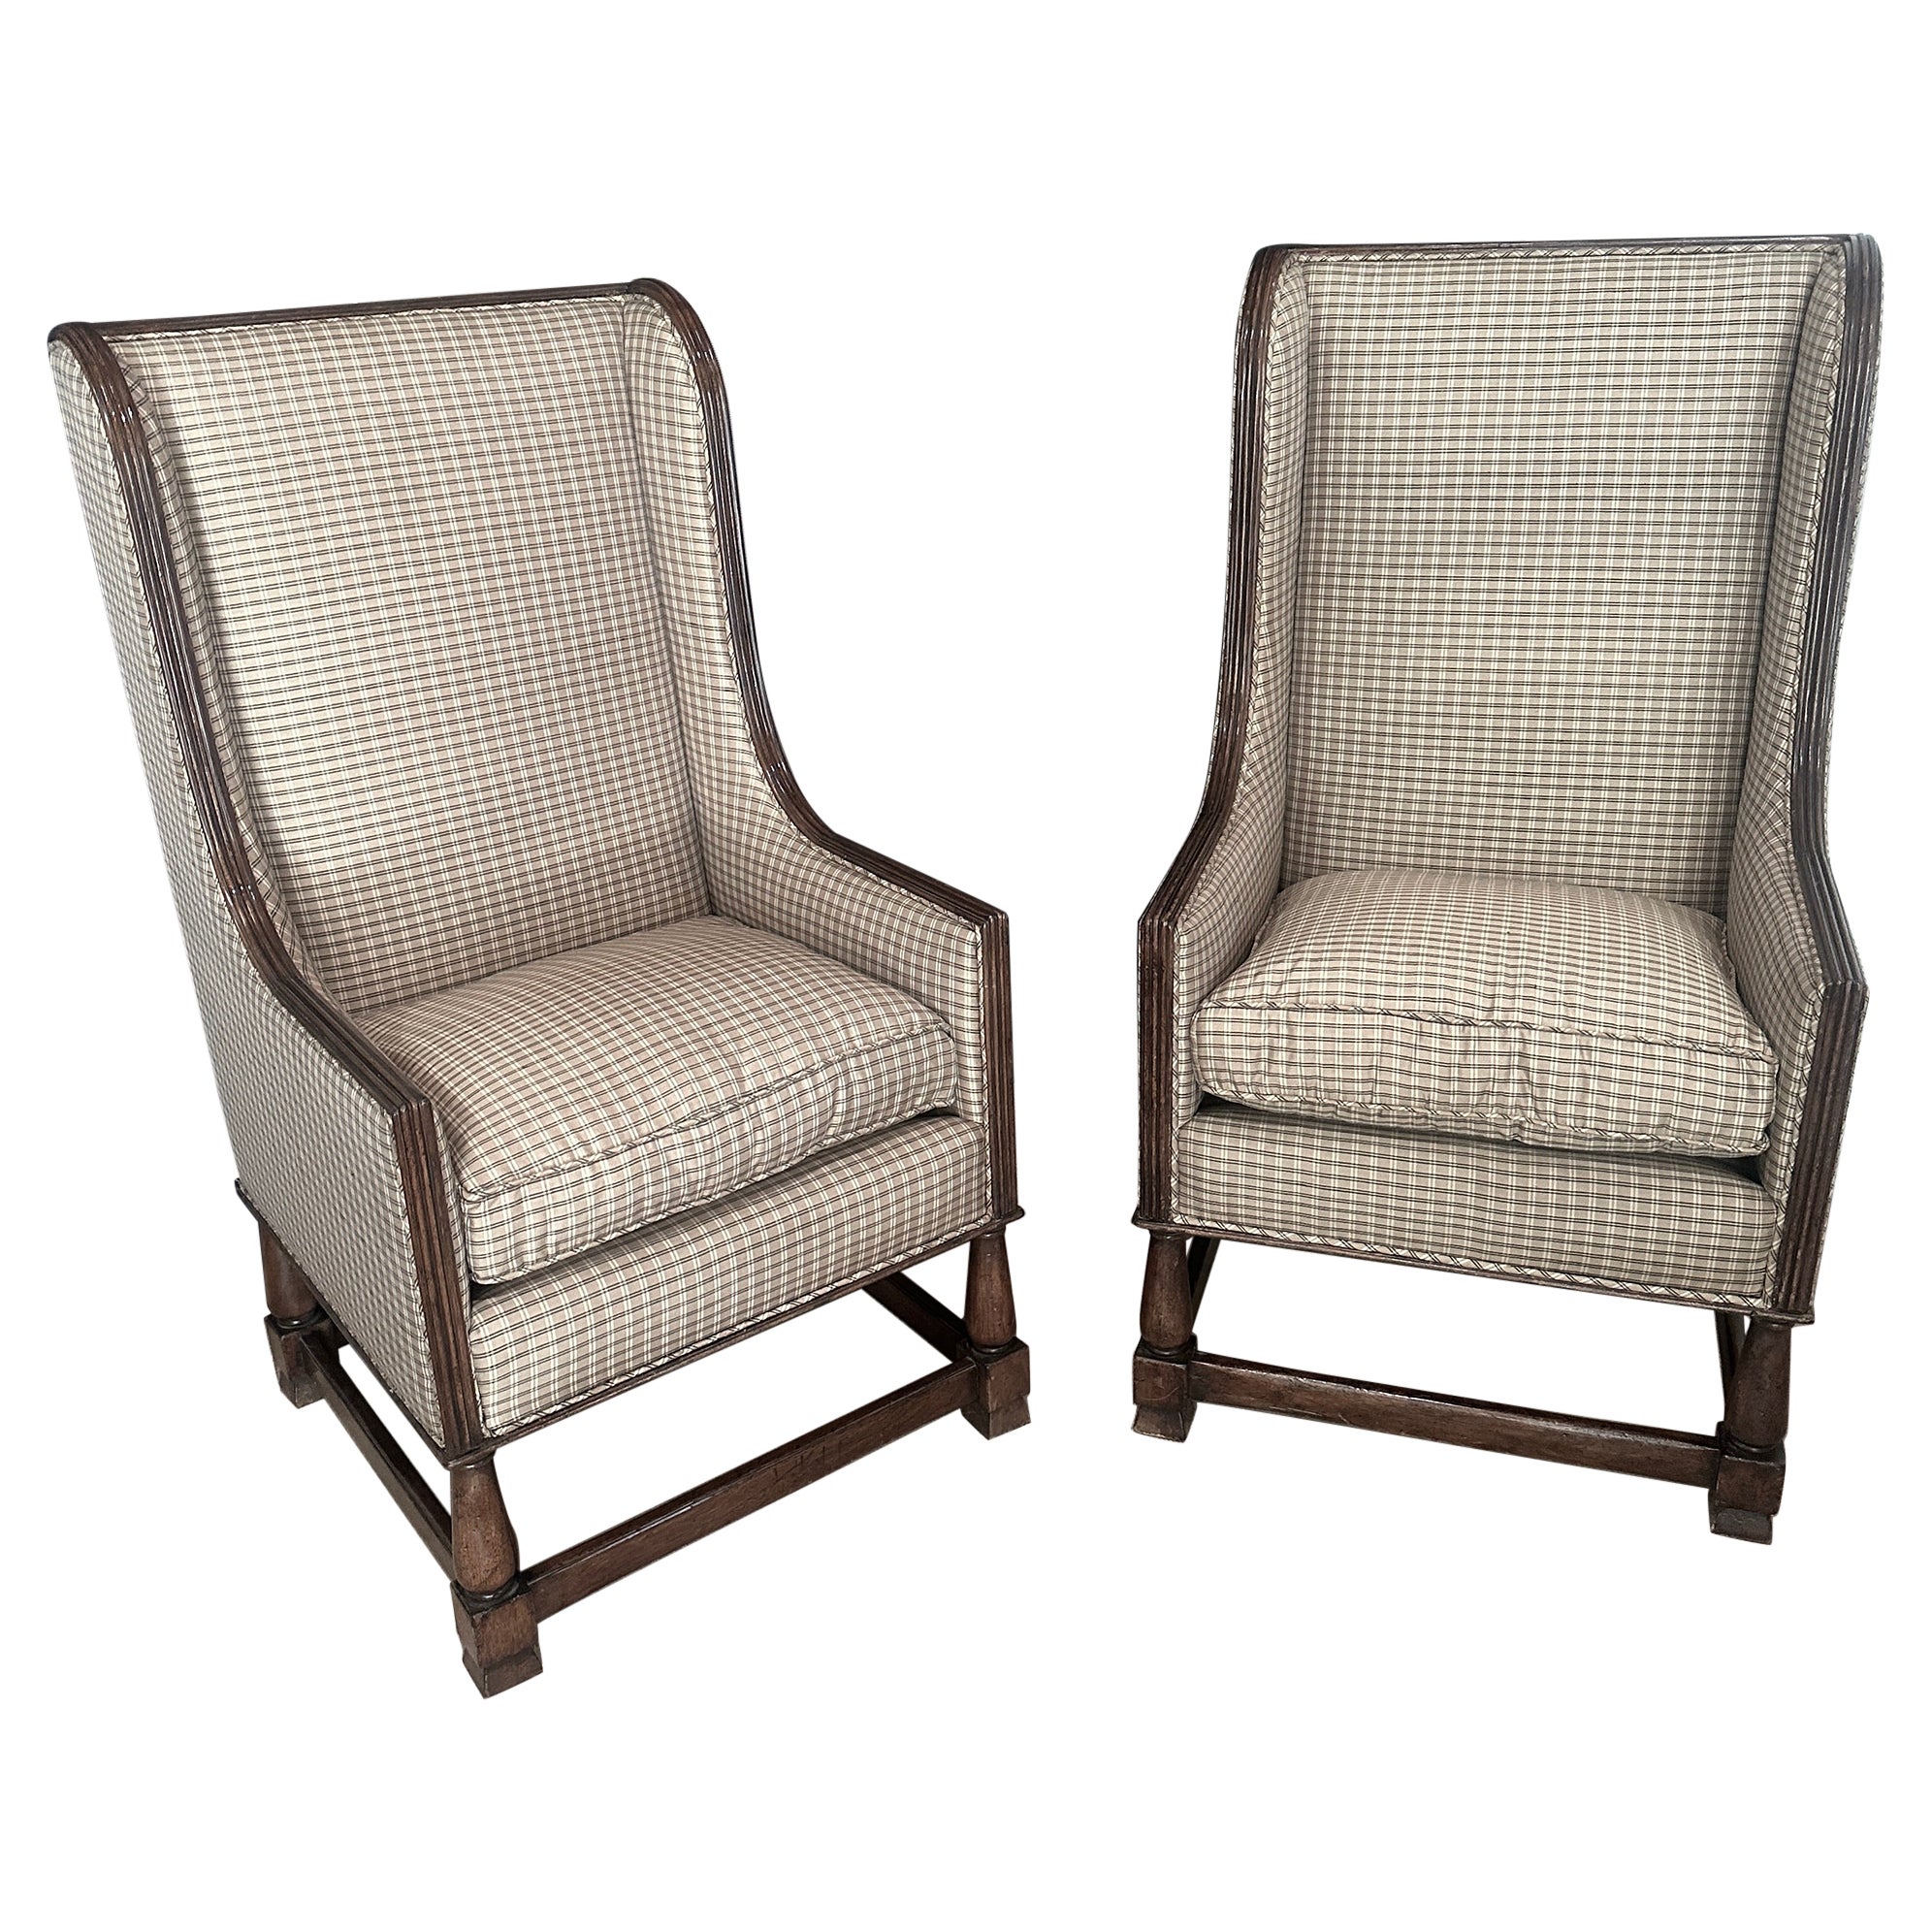  Italian Lounge Chairs in Walnut -a pair - newly upholstered in Silk Plaid For Sale